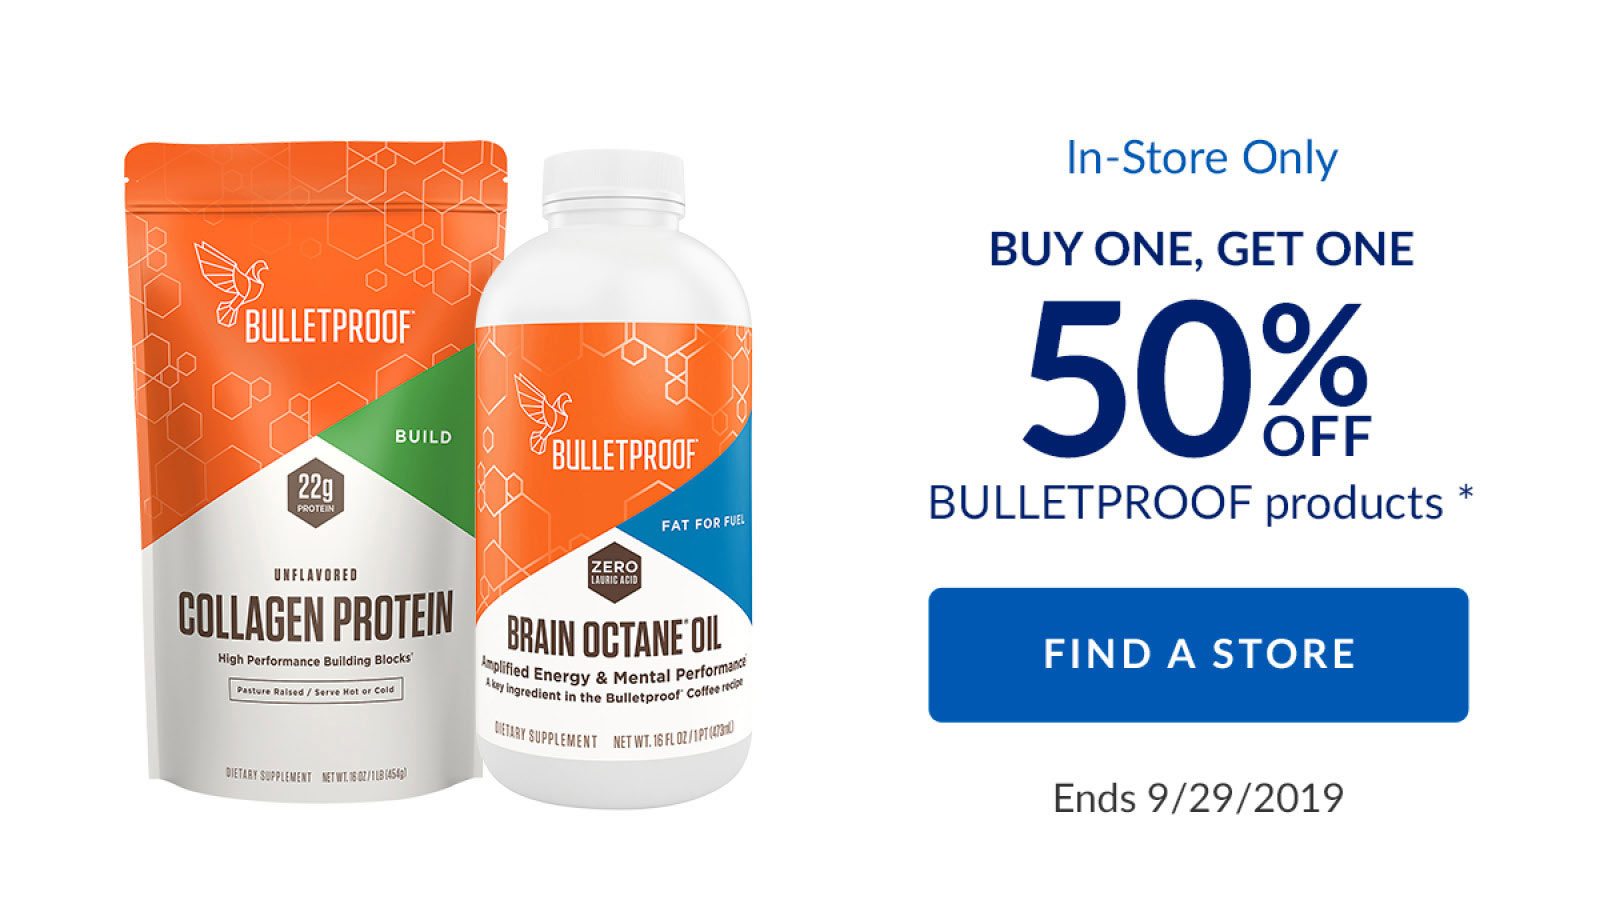 In-Store Only | BUY ONE, GET ONE 50% OFF BULLETPROOF products * | FIND A STORE | Ends 9/29/2019